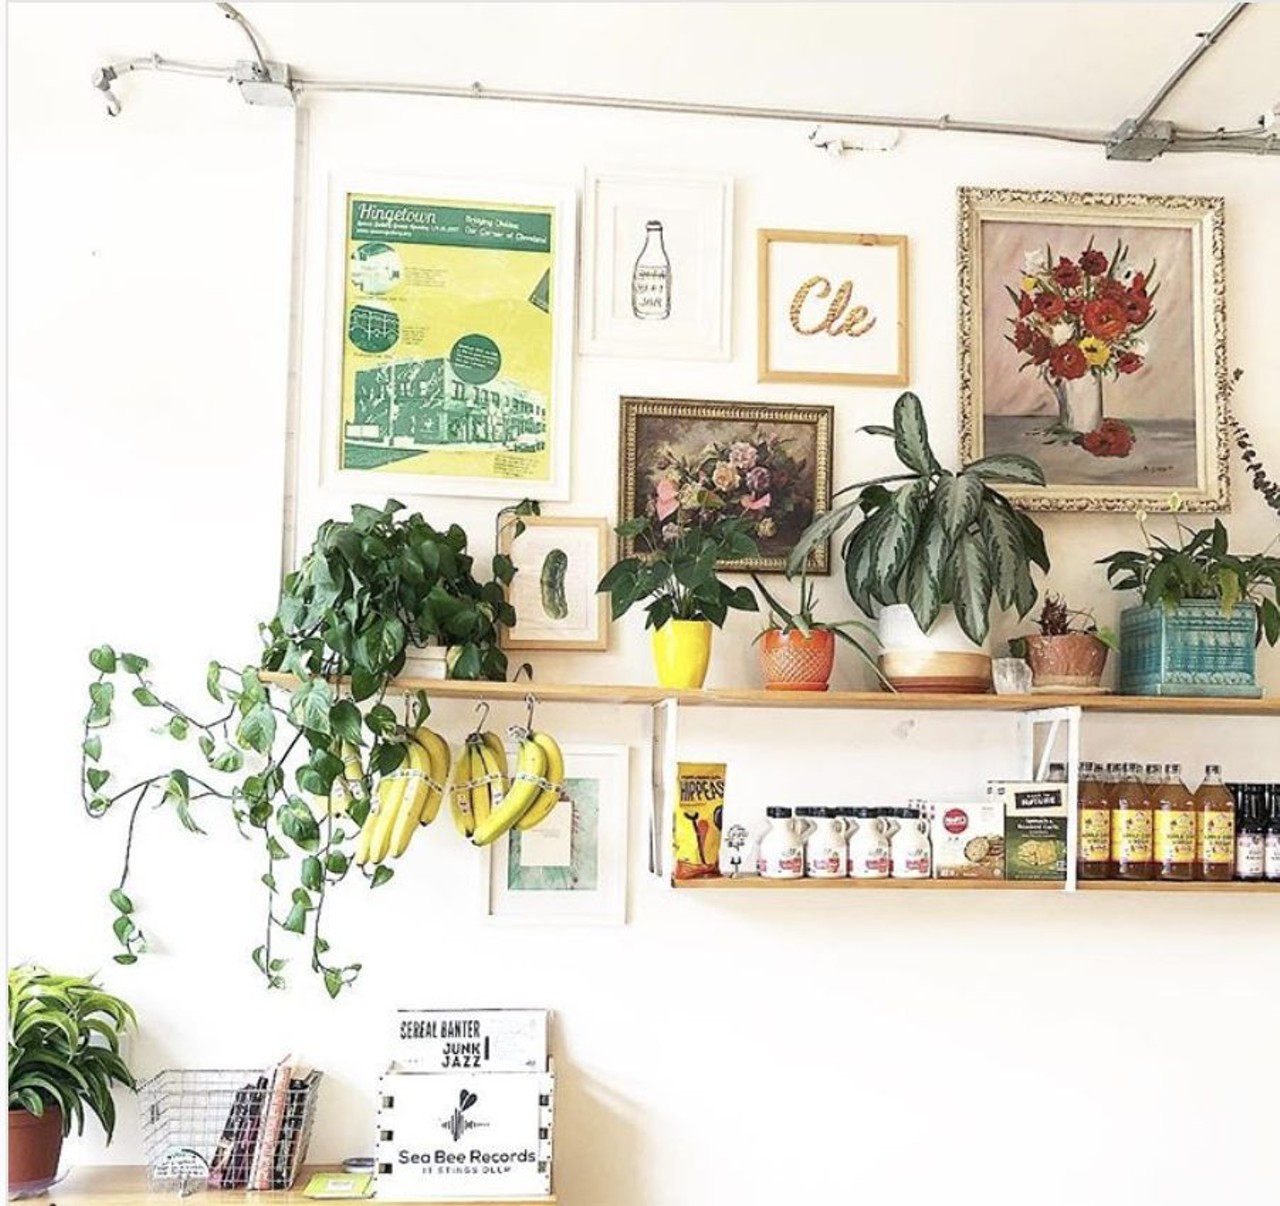  beth, MS, RD, LDN
As her bio states, the Beth behind bethandfood has an MS, RD, and LDN. If you don&#146;t know what those abbreviations stand for, just know that you can expect lots of fruit, veggies, and, avocado toast (on Ezekial bread, of course).
Photo via  Cle_foods/Instagram